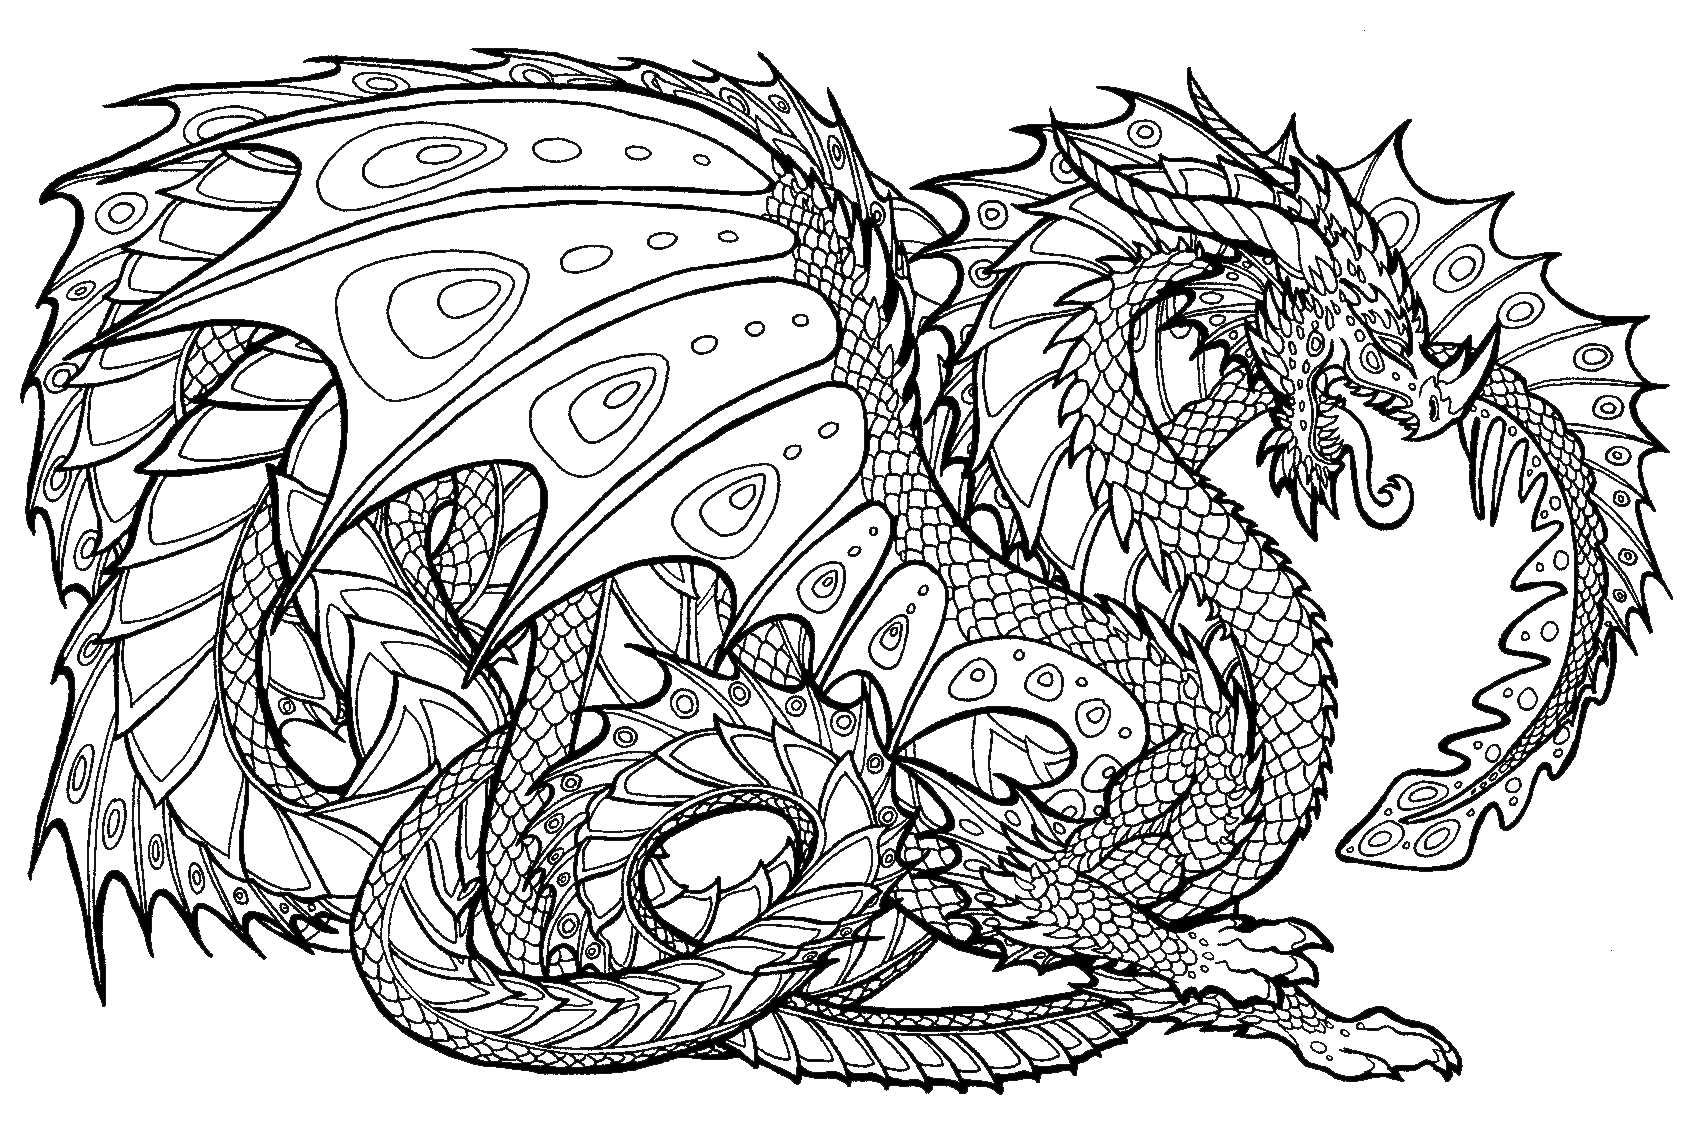 Realistic Dragon - Coloring Pages for Kids and for Adults